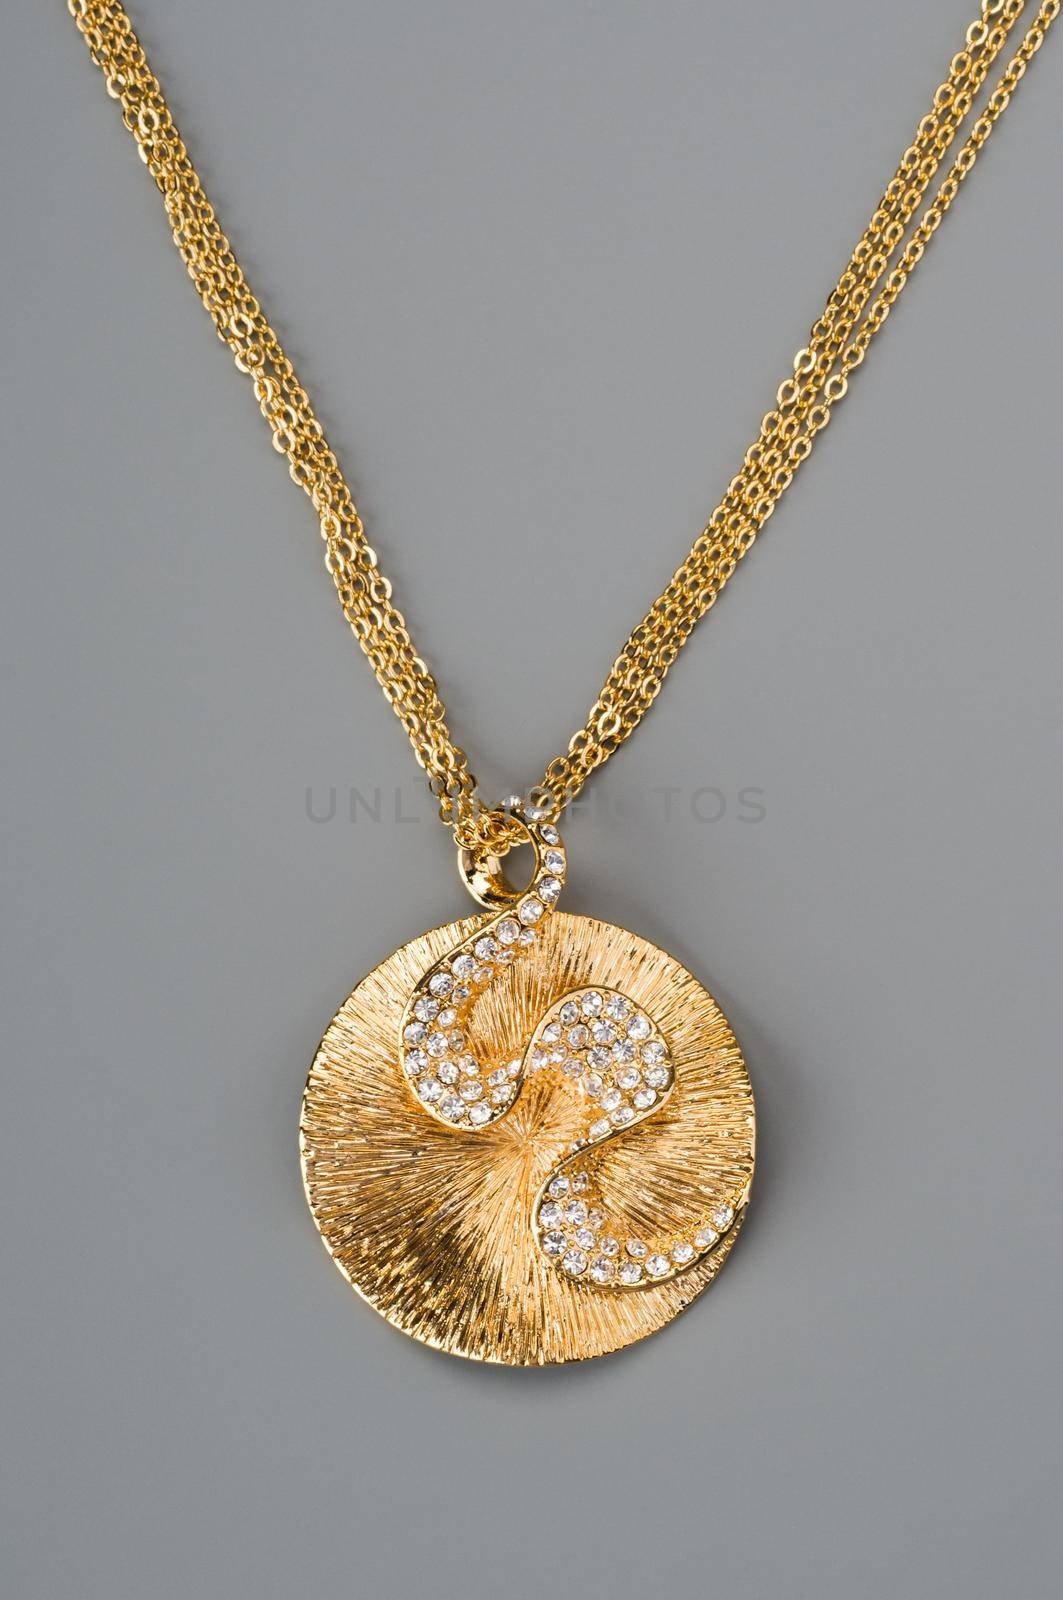 Gold necklace with pendant shot on gray background